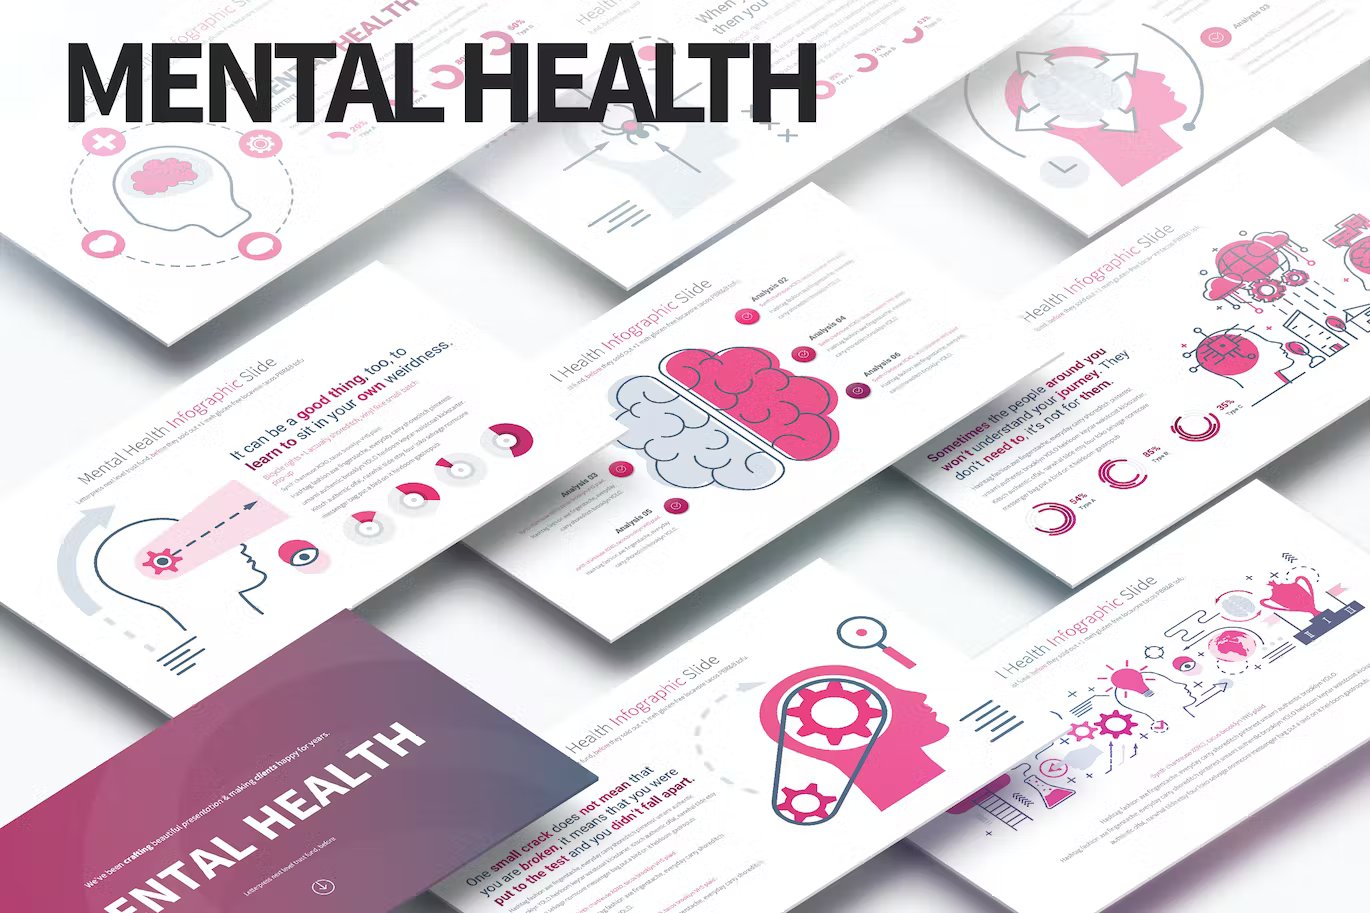 Black lettering "Mental Health" on the background of different presentation templates.